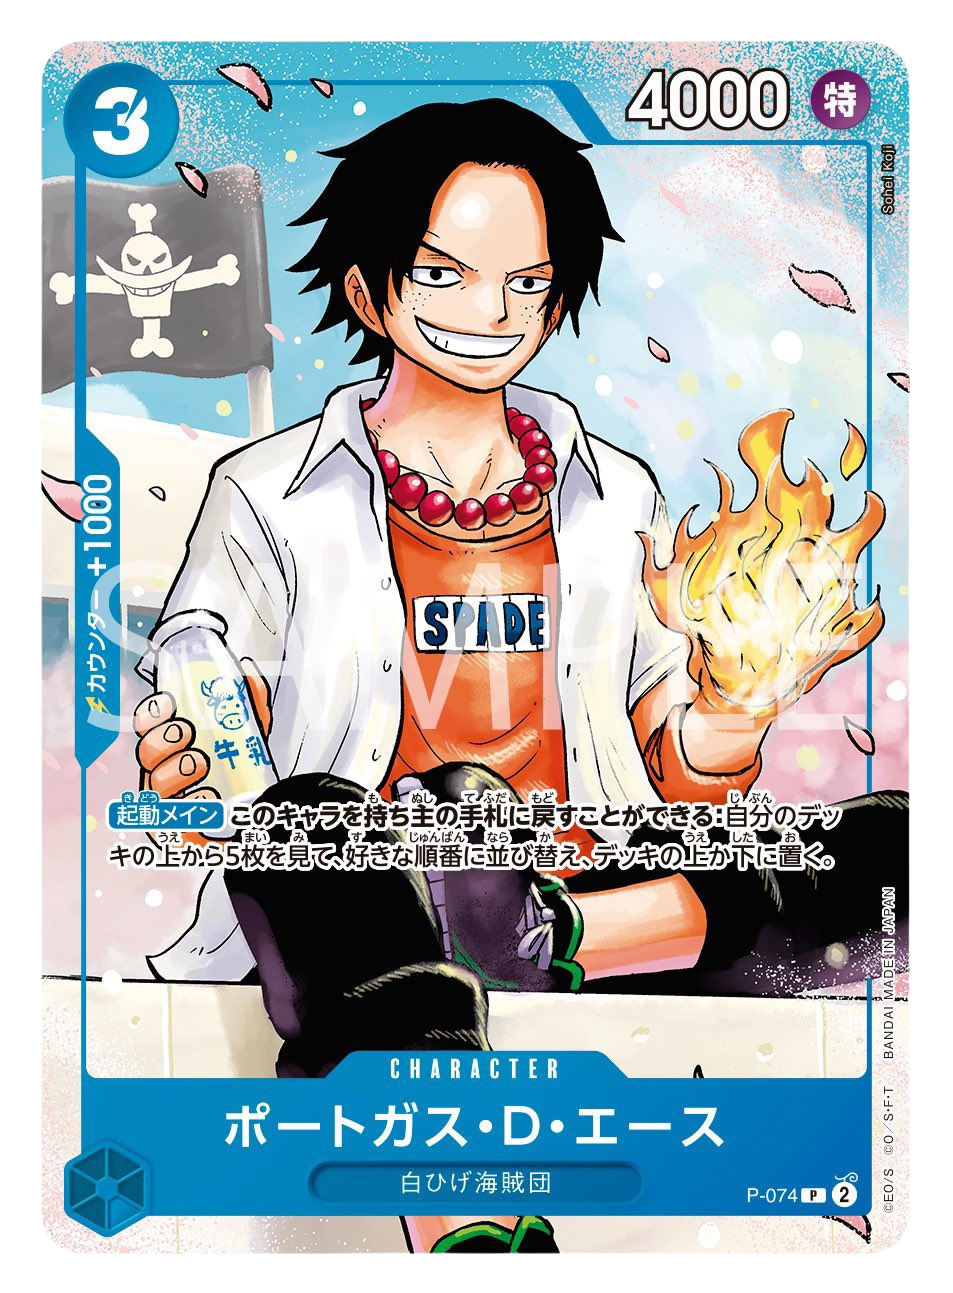 ONE PIECE CARD GAME - SAIKYO JUMP LIMITED EXCLUSIVE - LUFFY - ACE - SABO - THE STRONGEST 3 BROTHERS PACK - SPECIAL SET 3Pcs